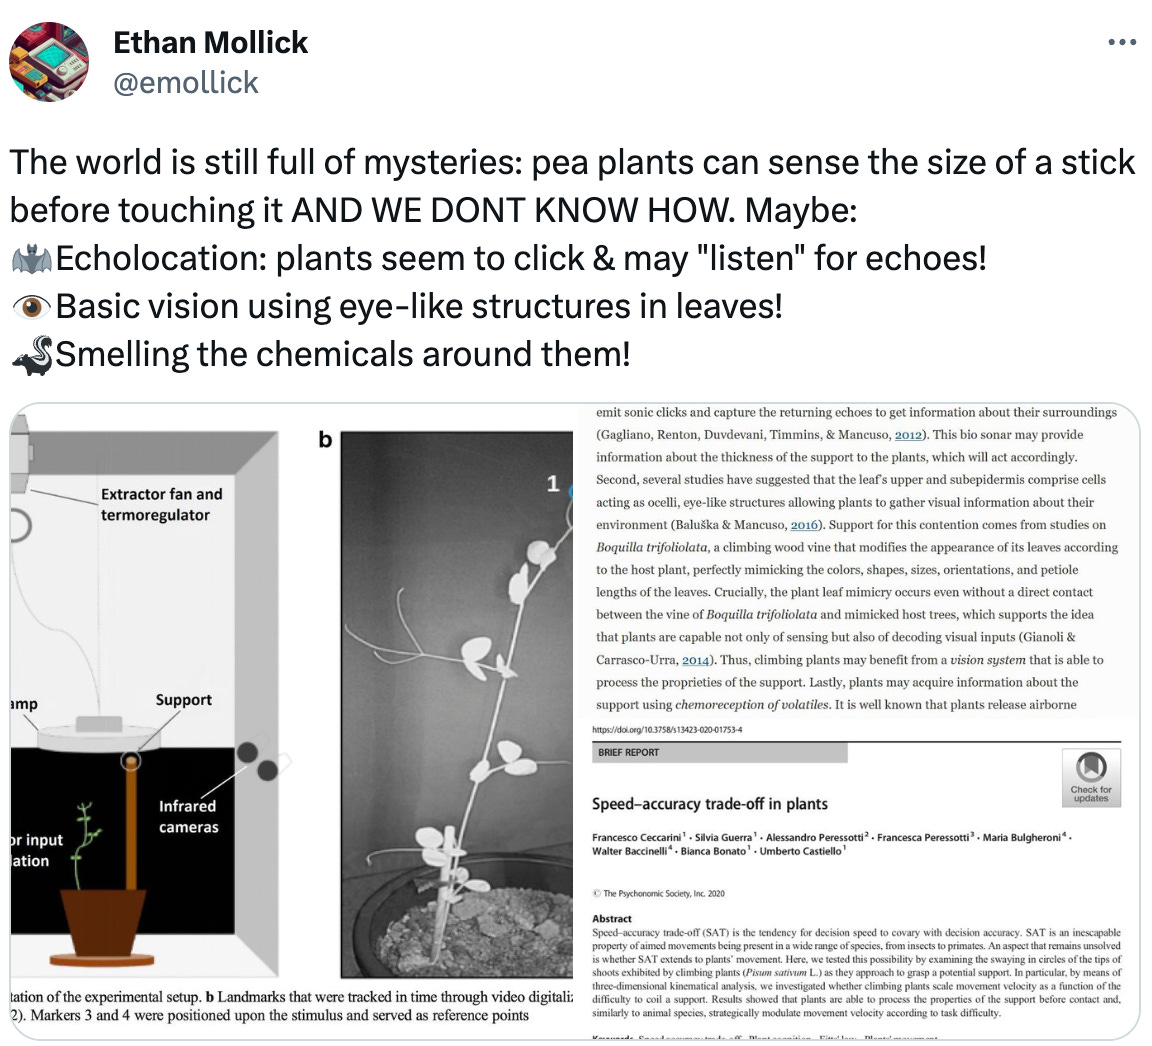  @emollick The world is still full of mysteries: pea plants can sense the size of a stick before touching it AND WE DONT KNOW HOW. Maybe: 🦇Echolocation: plants seem to click & may "listen" for echoes! 👁️Basic vision using eye-like structures in leaves! 🦨Smelling the chemicals around them!